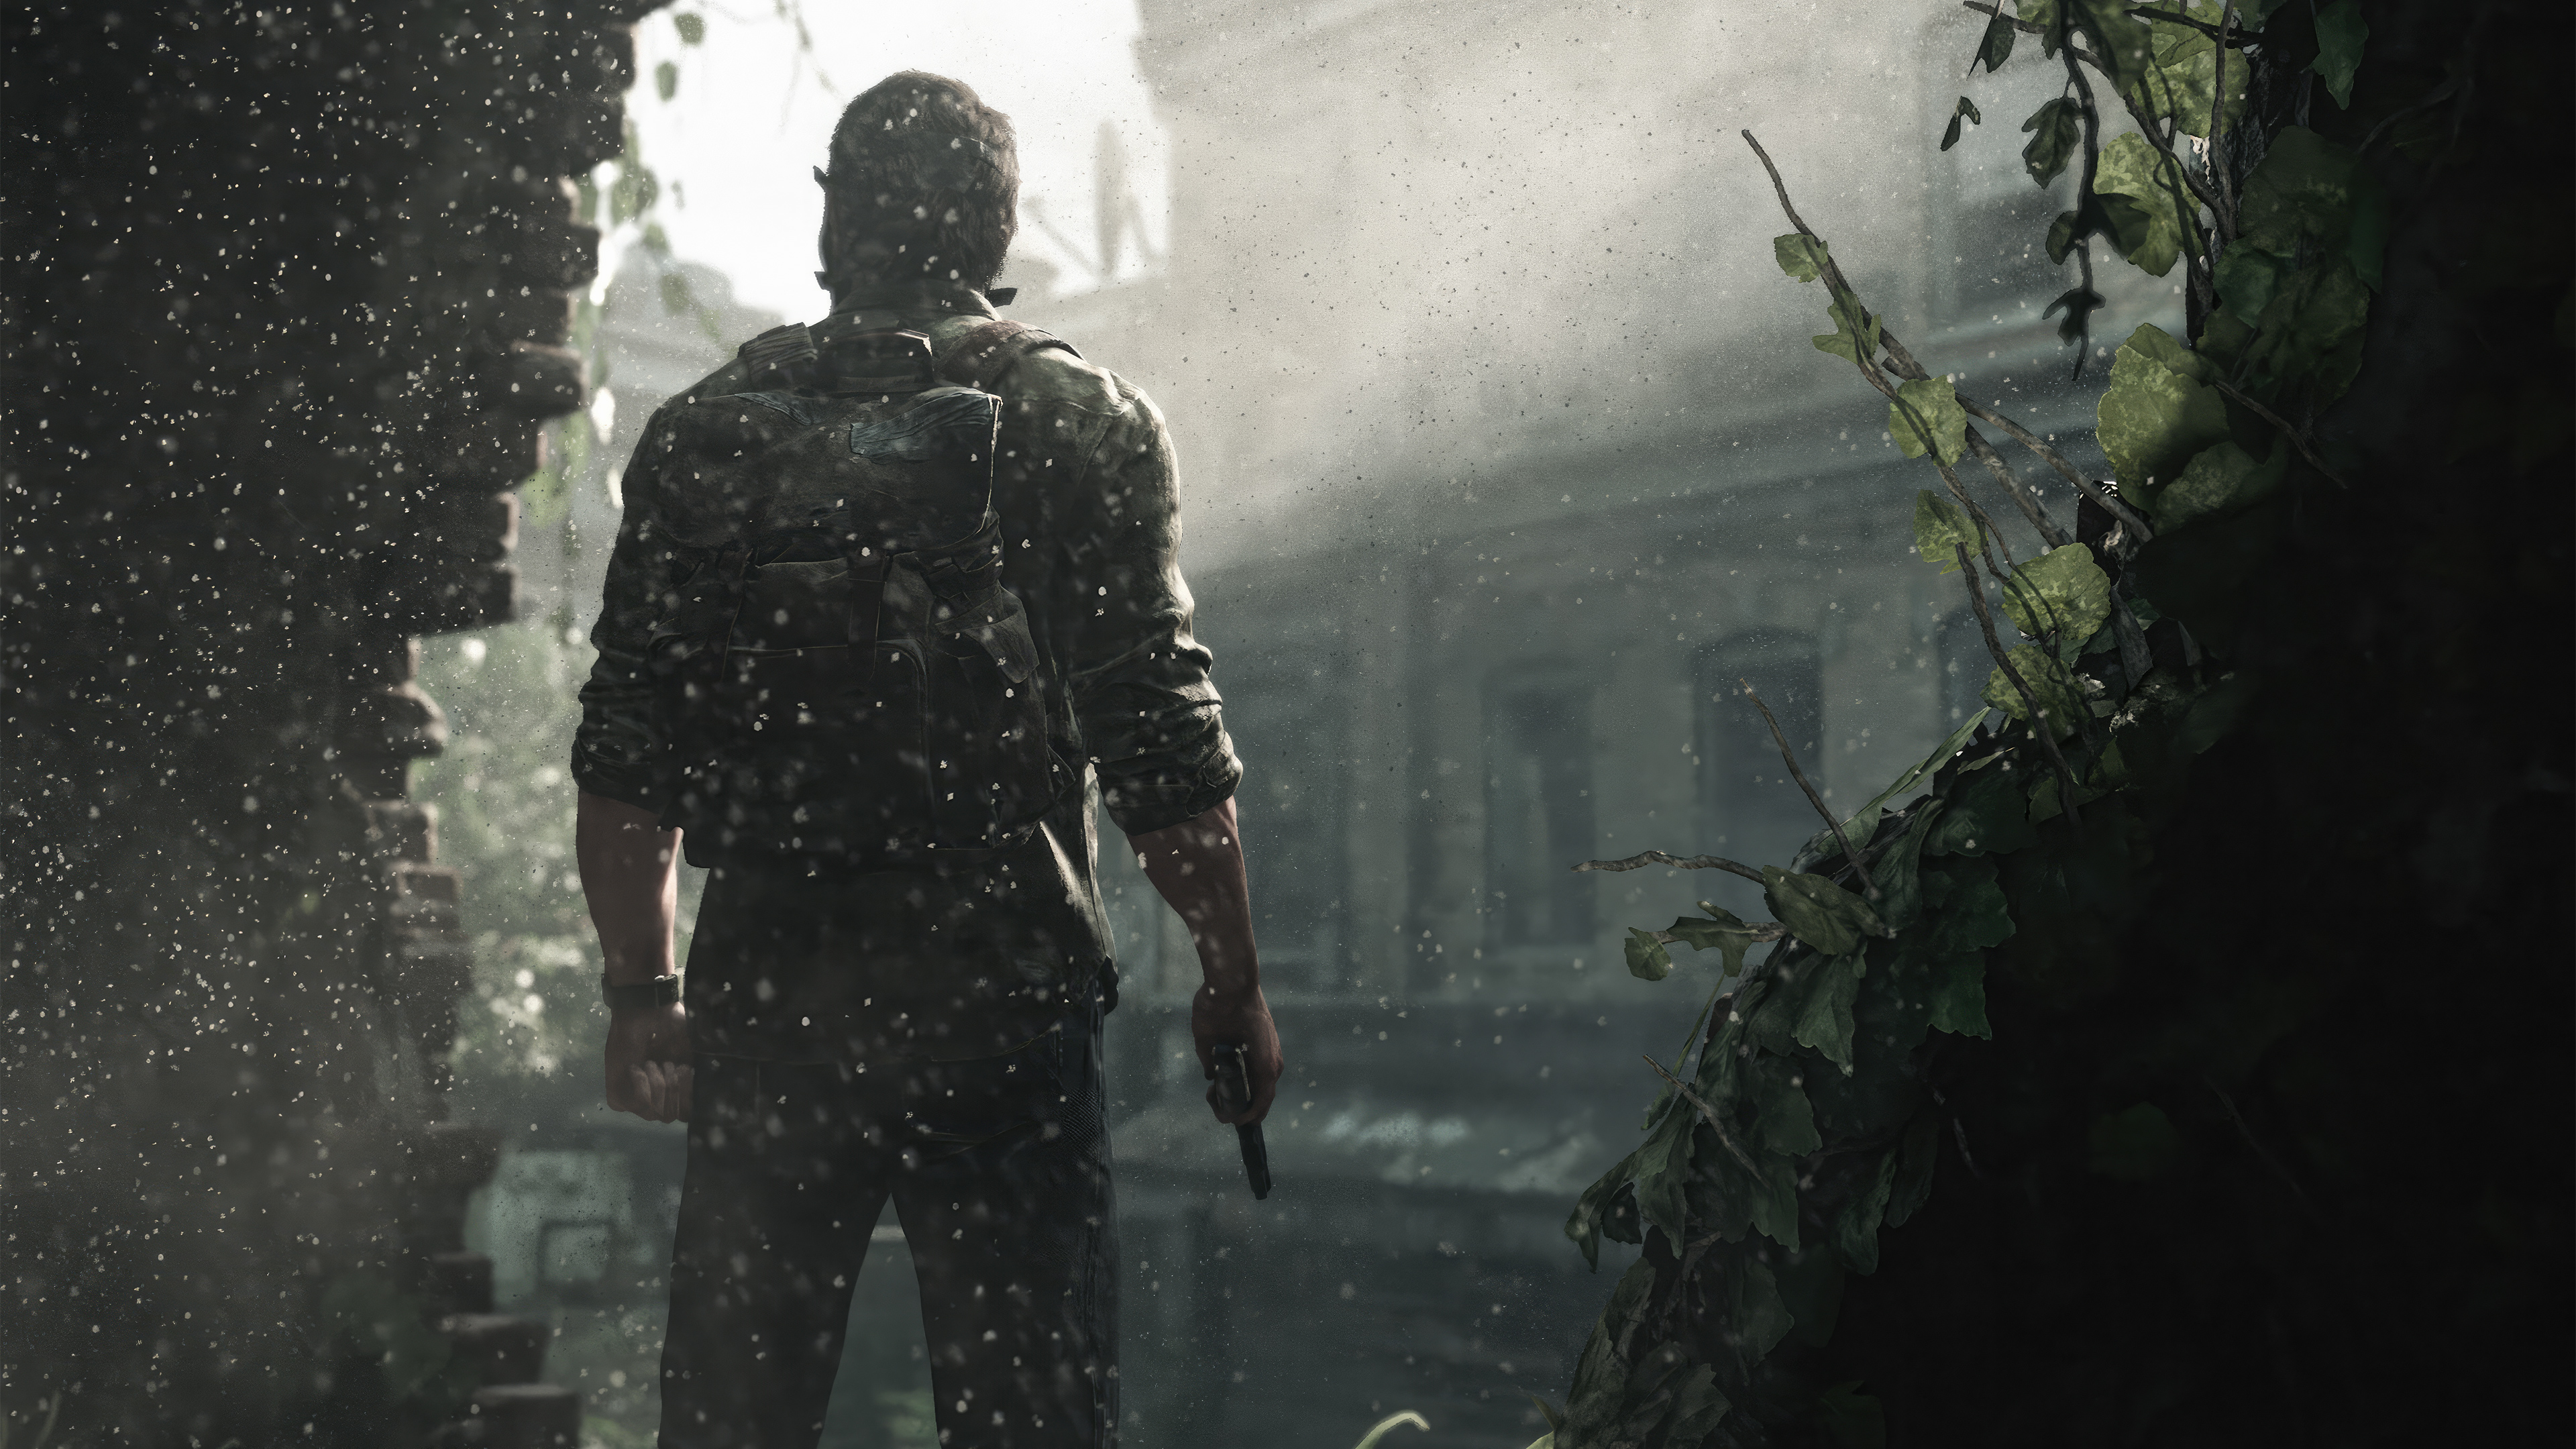 The Last Of Us Part 1 2023 Wallpaper,HD Games Wallpapers,4k